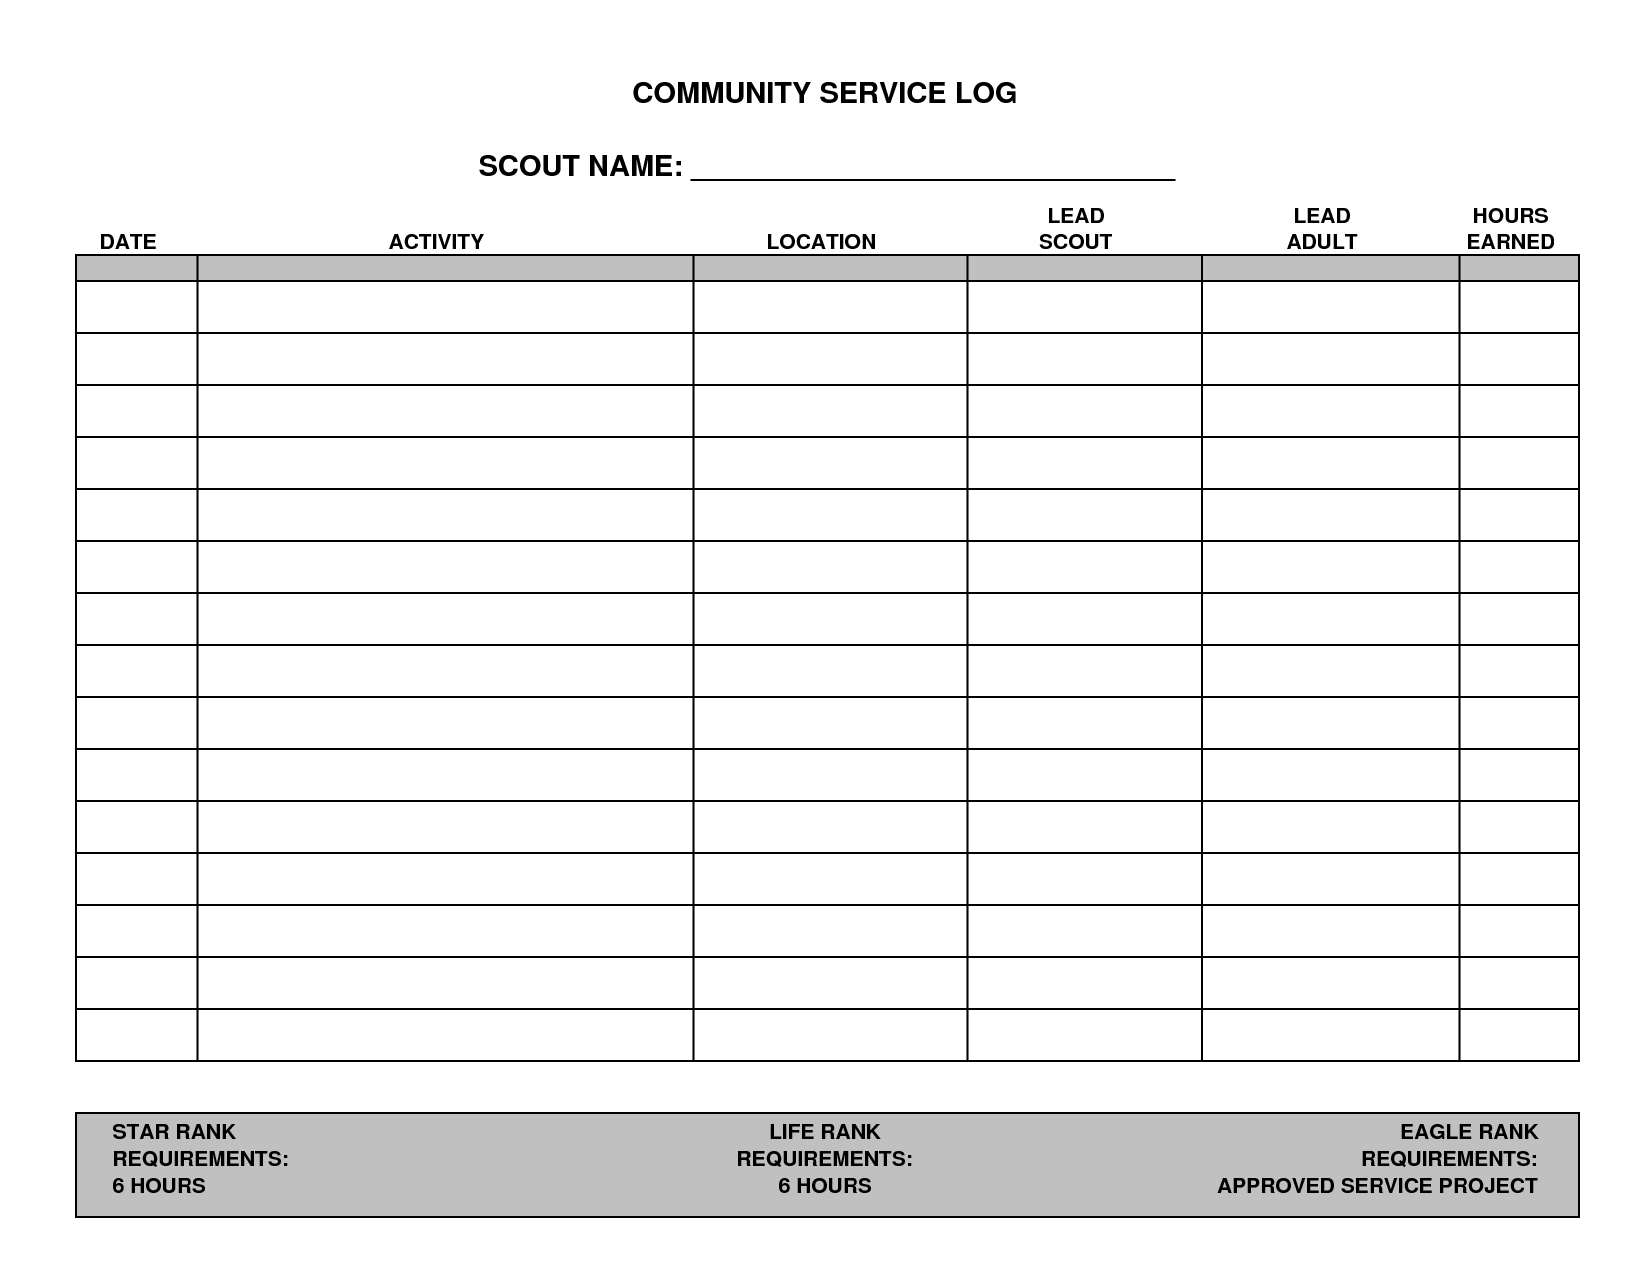 Hourly Log Template. Free Car Rental Reservation Template. Hourly - Free Printable Community Service Log Sheet